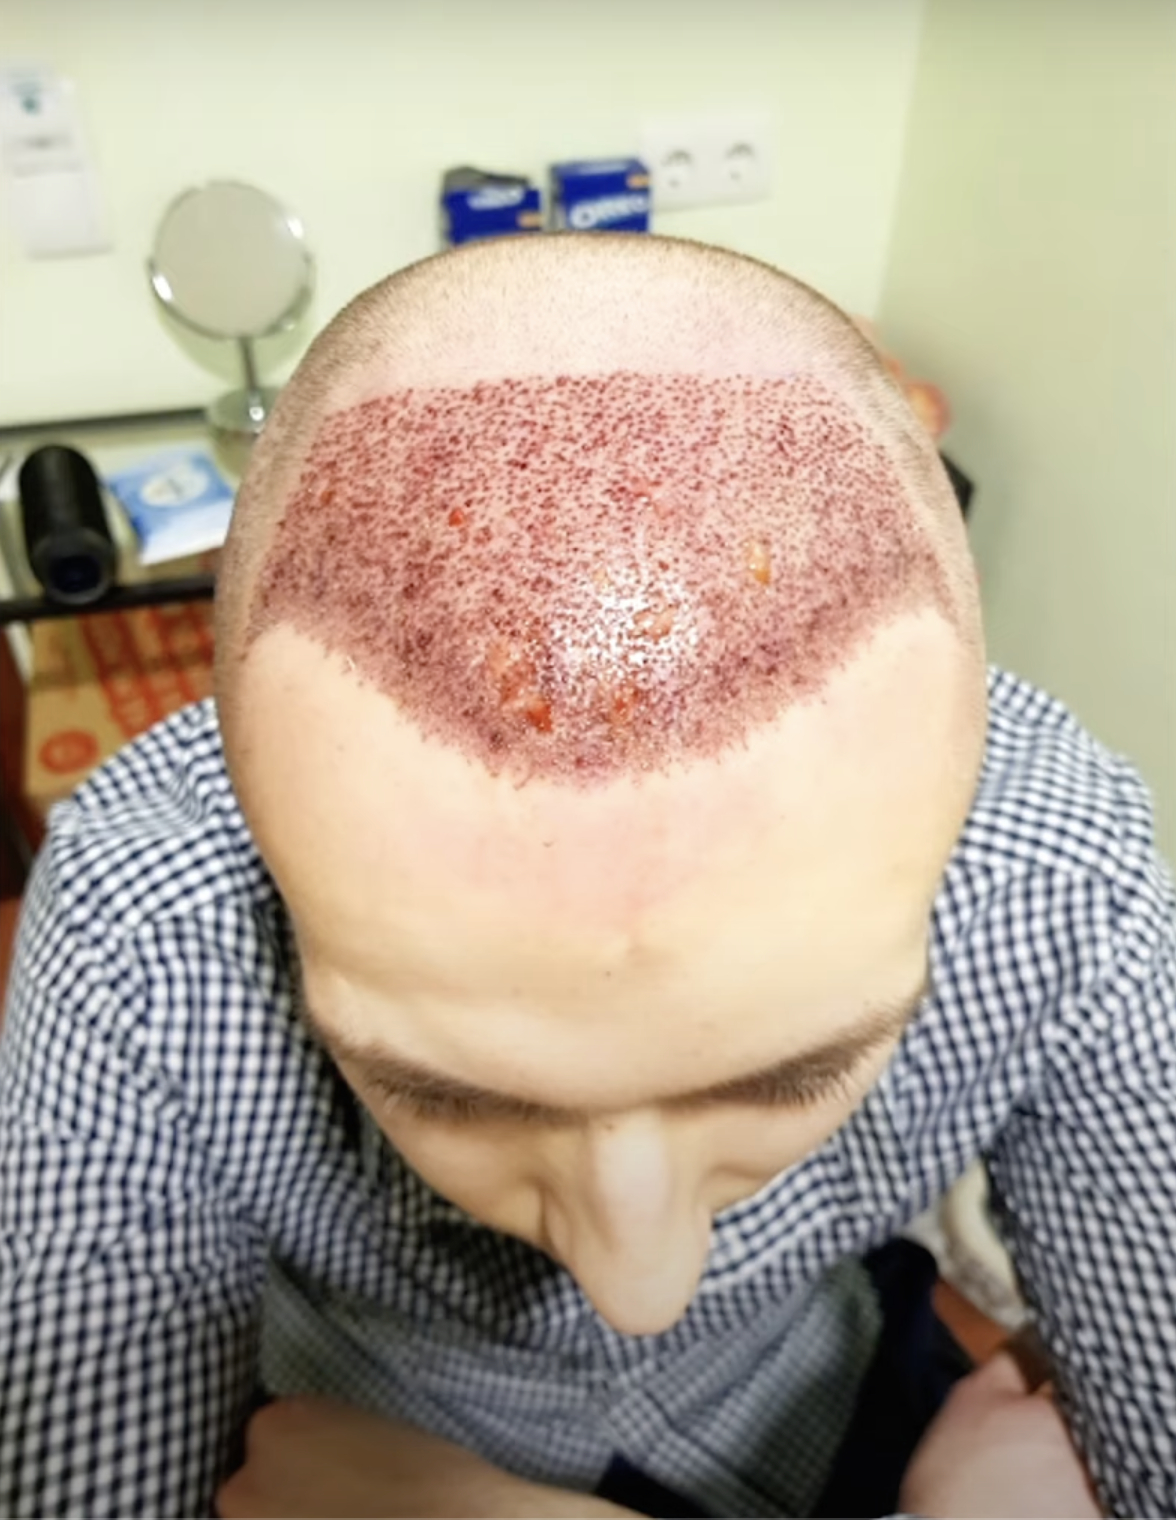 Immediately after FUE hair transplant procedure